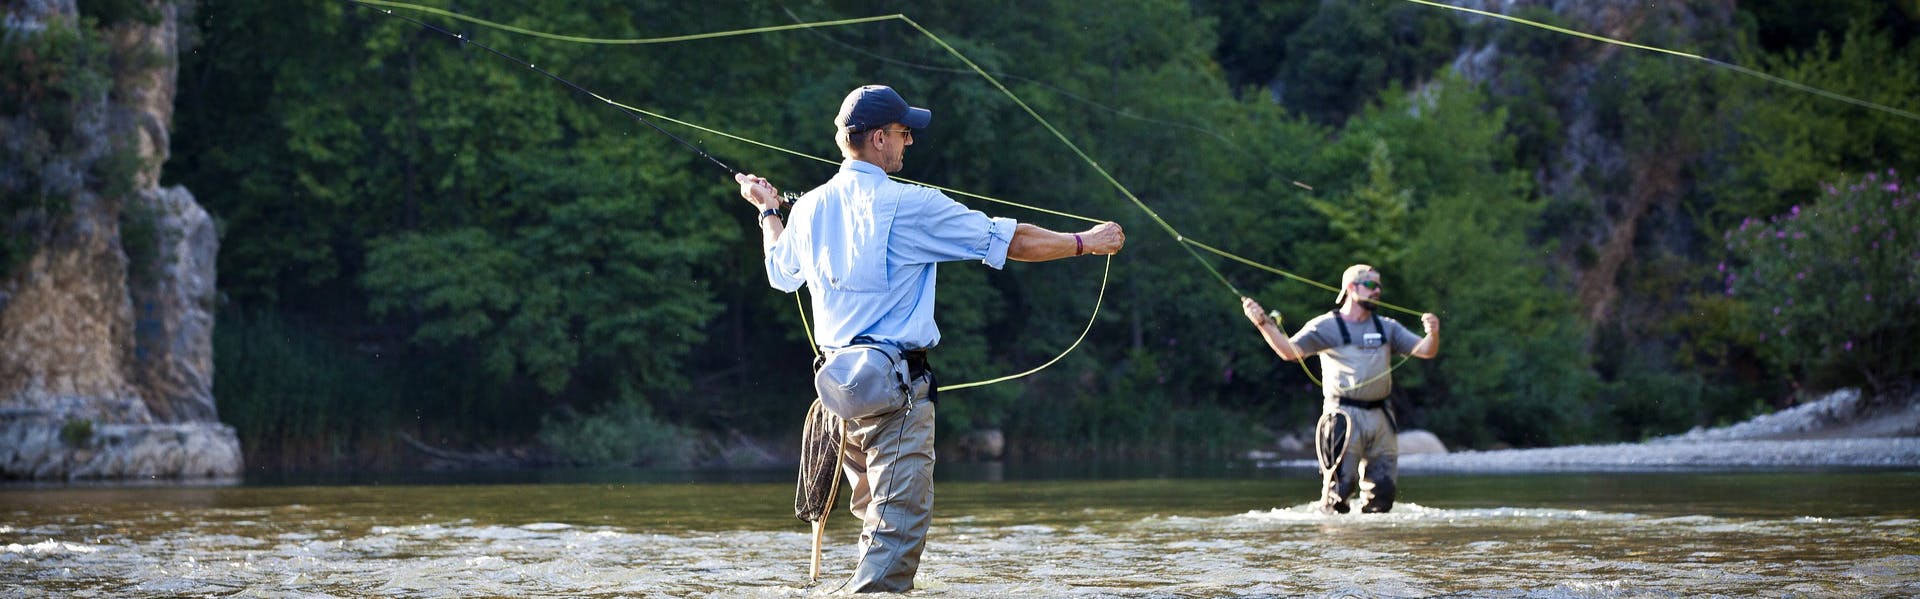 The 5 Best 5-Weight Fly Rod Options for You